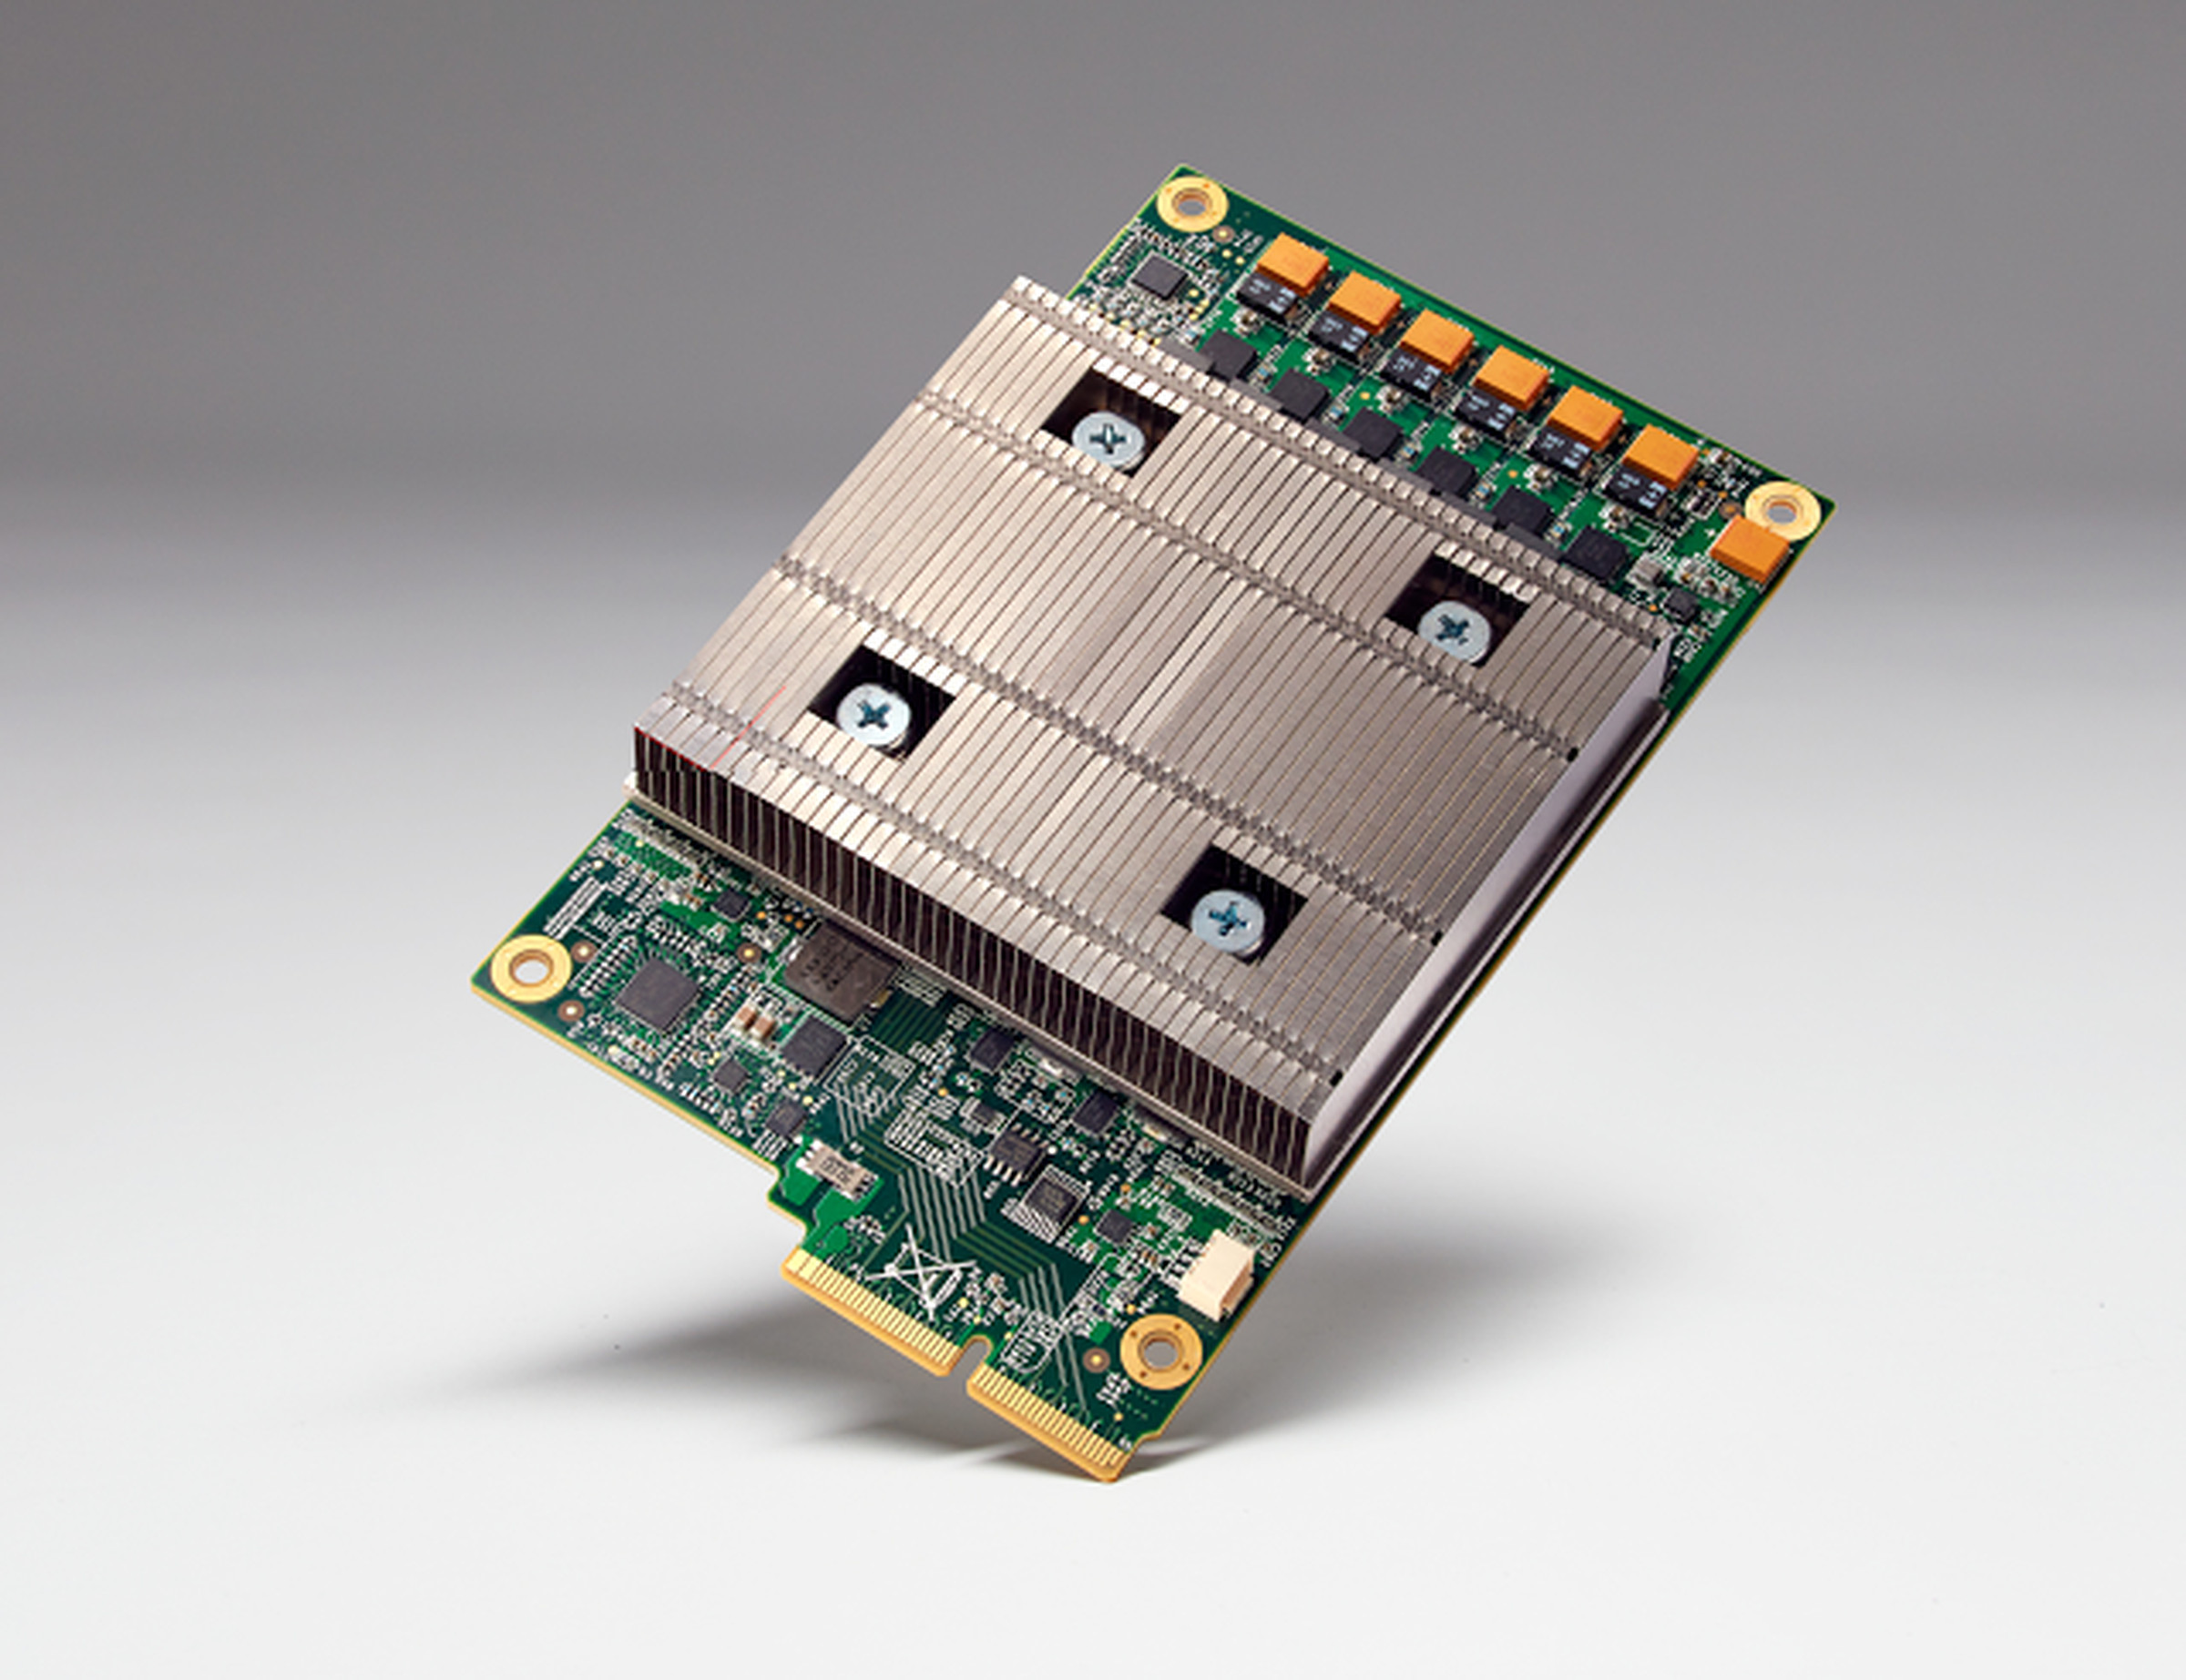 The Edge TPU is the little brother of the regular Tensor Processing Unit, which Google uses to power its own AI, and which is available for other customers to use via Google Cloud. 